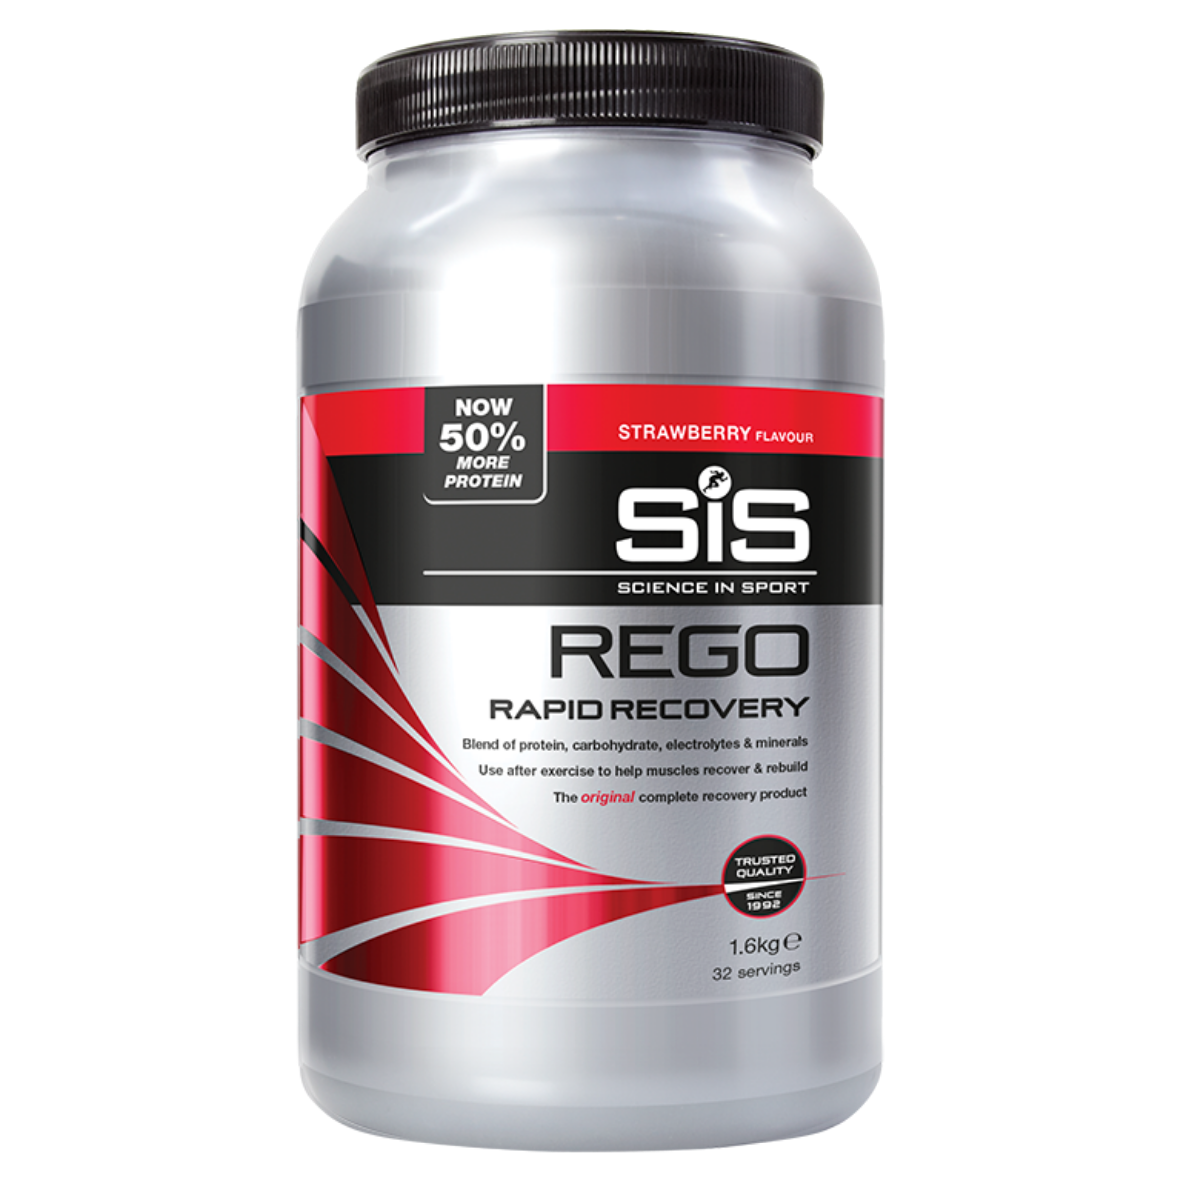 Science in Sport REGO Rapid Recovery Strawberry Protein